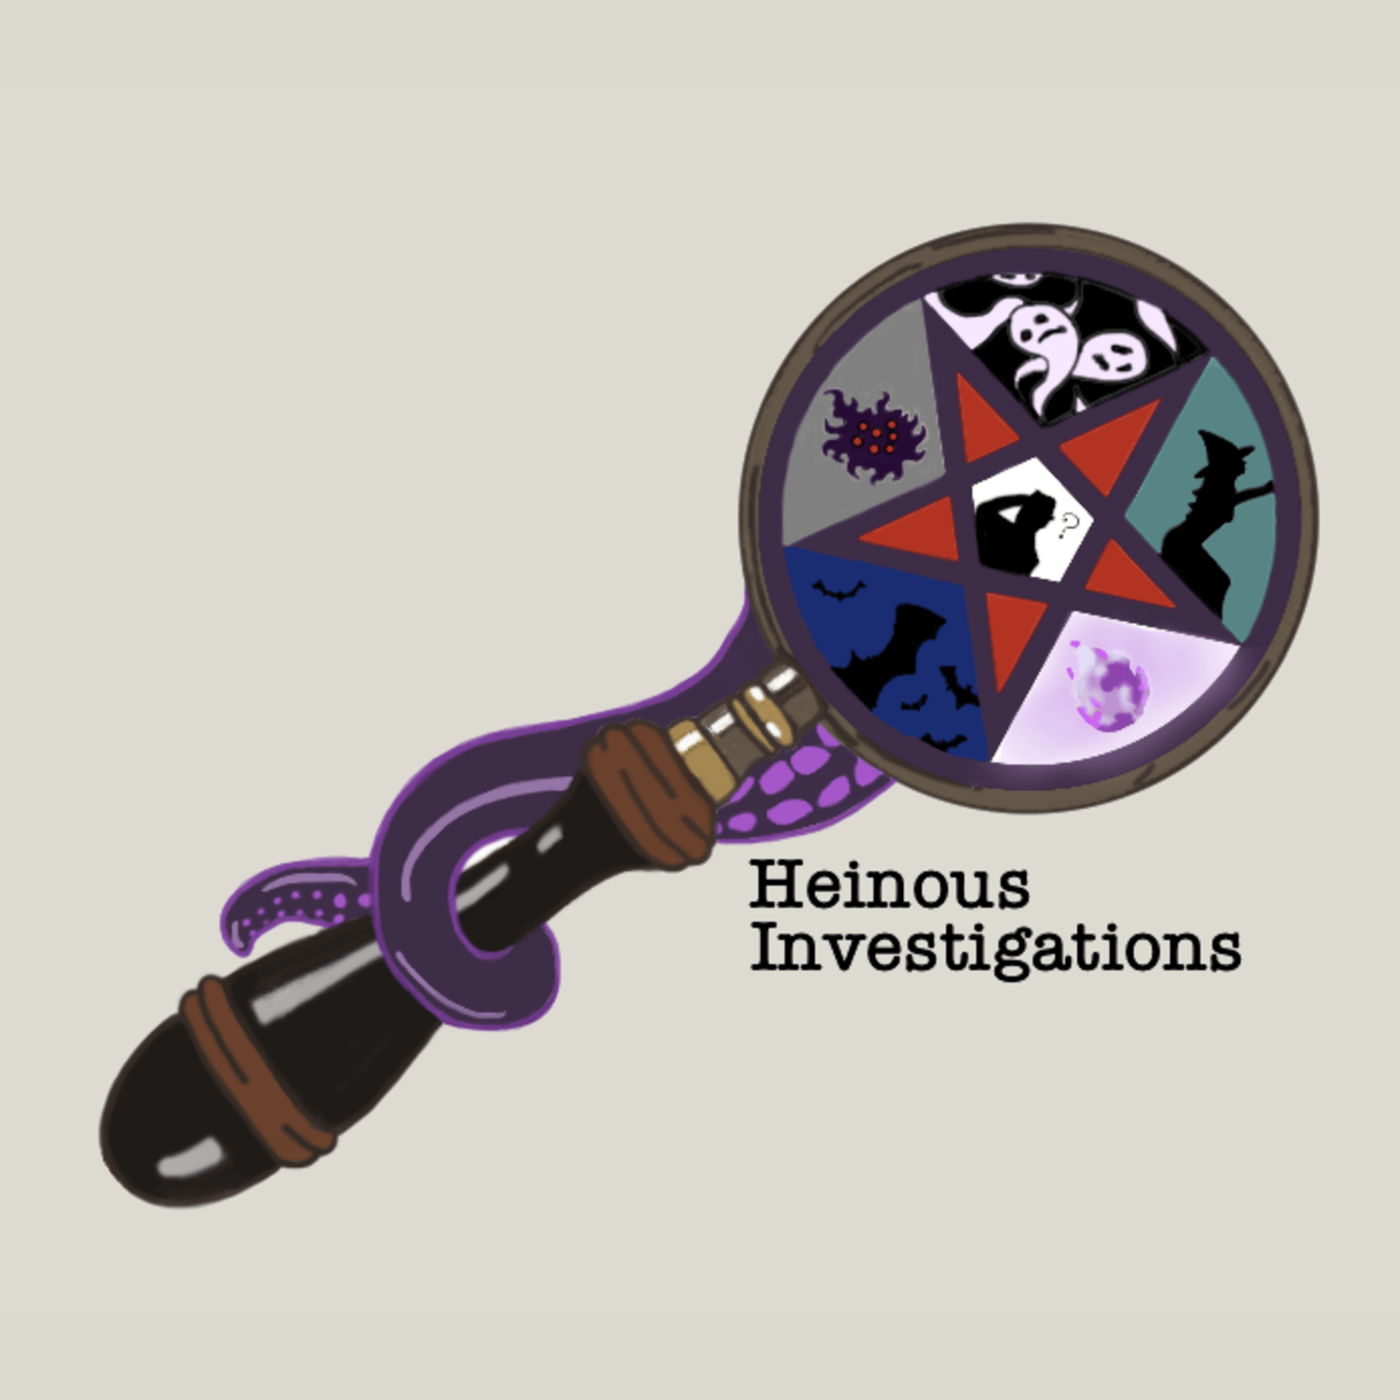 A Message from Heinous Investigations (09/01/2021)